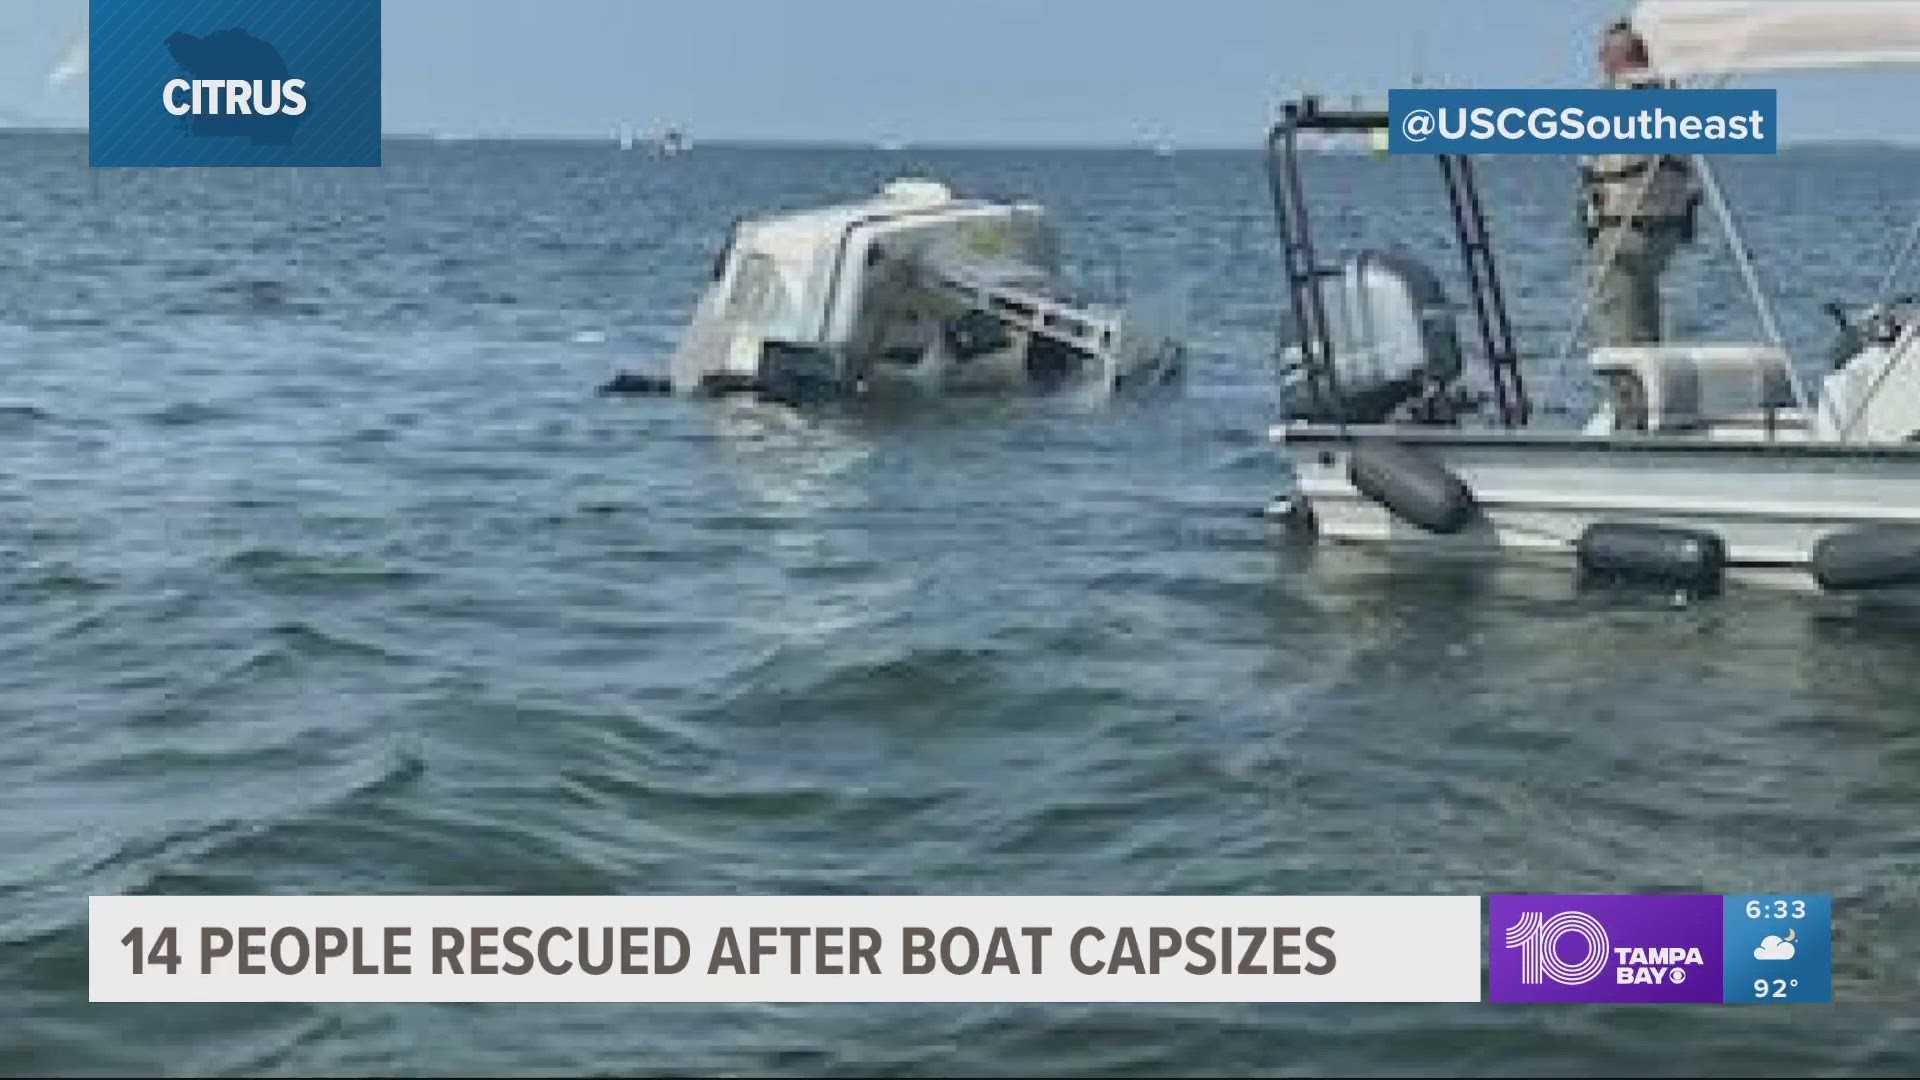 Officials say there were no reported injuries to any of the people rescued.